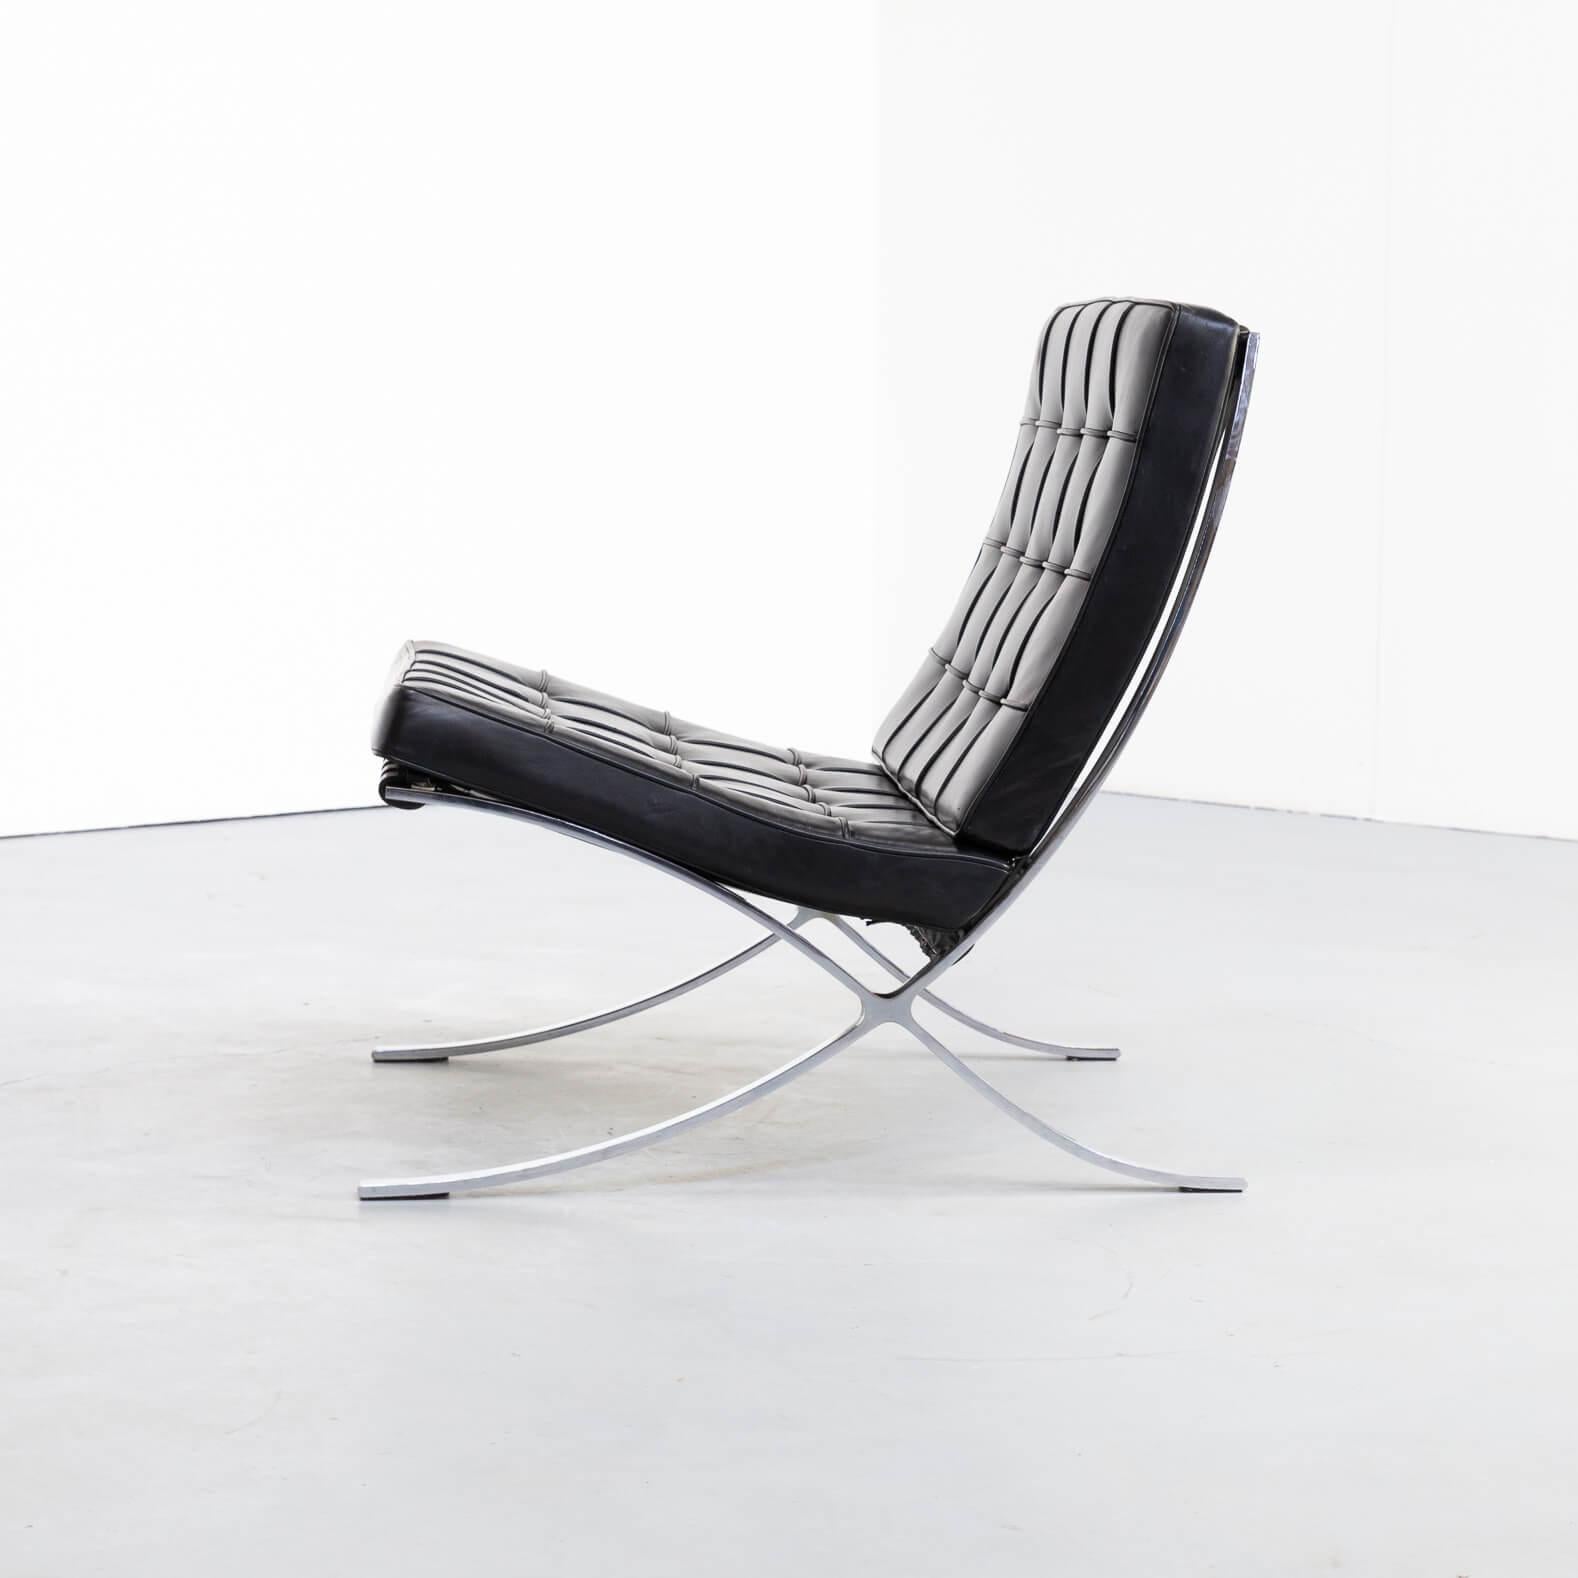 1930s Mies van der Rohe ‘Barcelona’ Chair for Knoll In Good Condition For Sale In Amstelveen, Noord